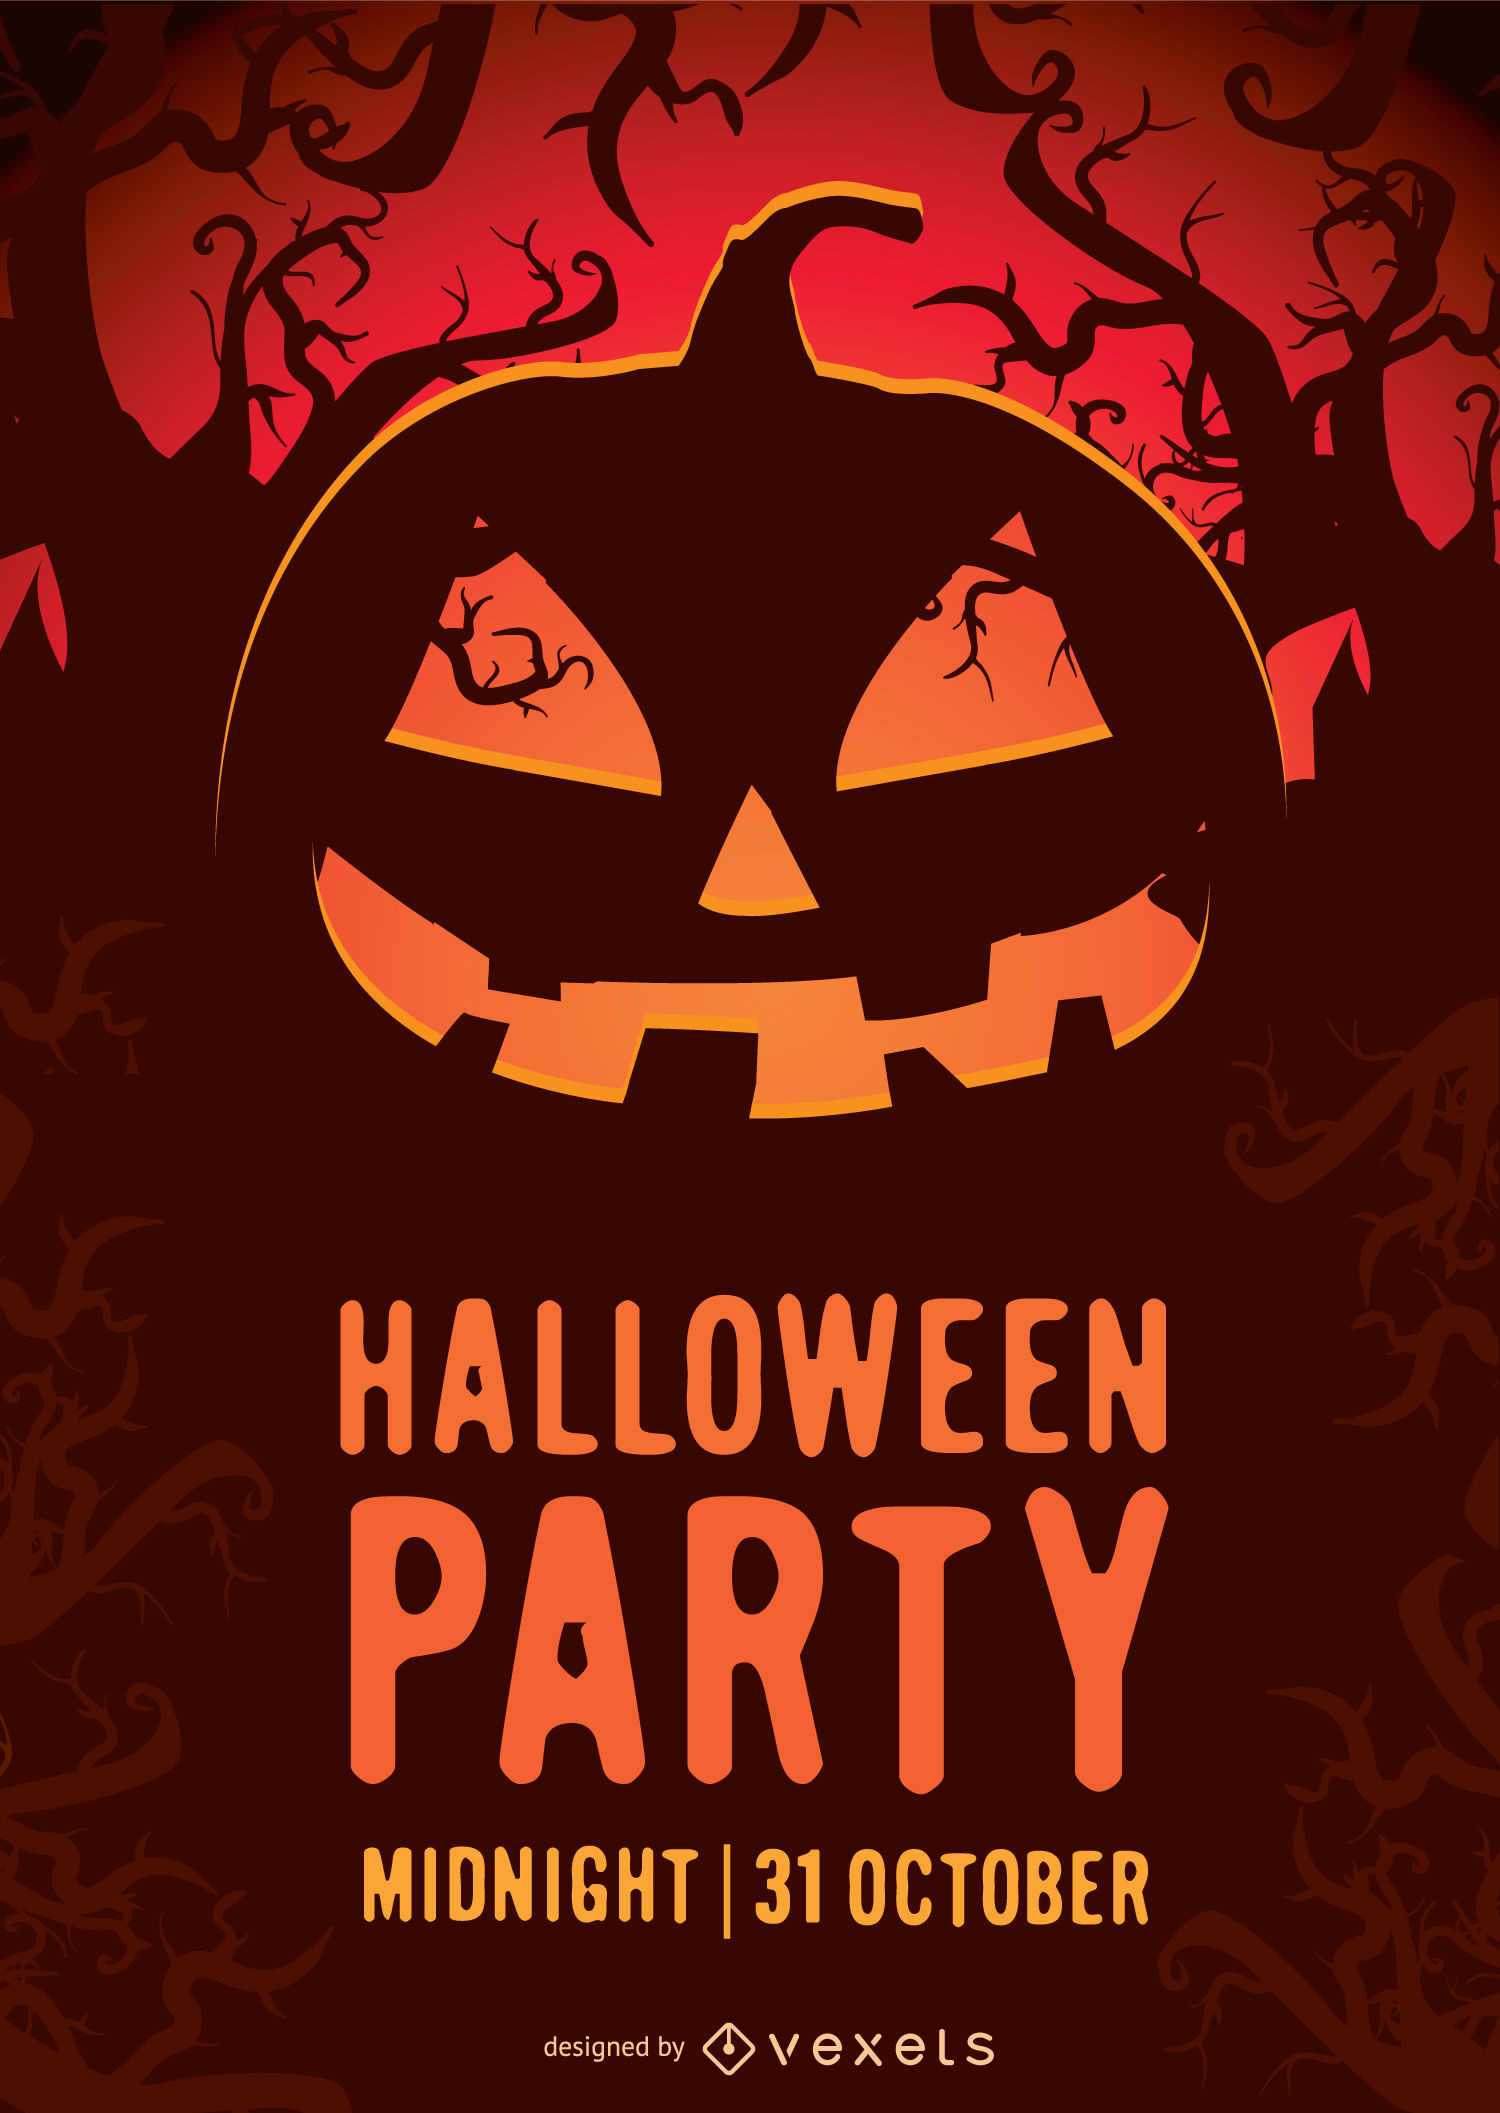 Halloween Party Poster Ideas
 Halloween Party Poster Vector Download